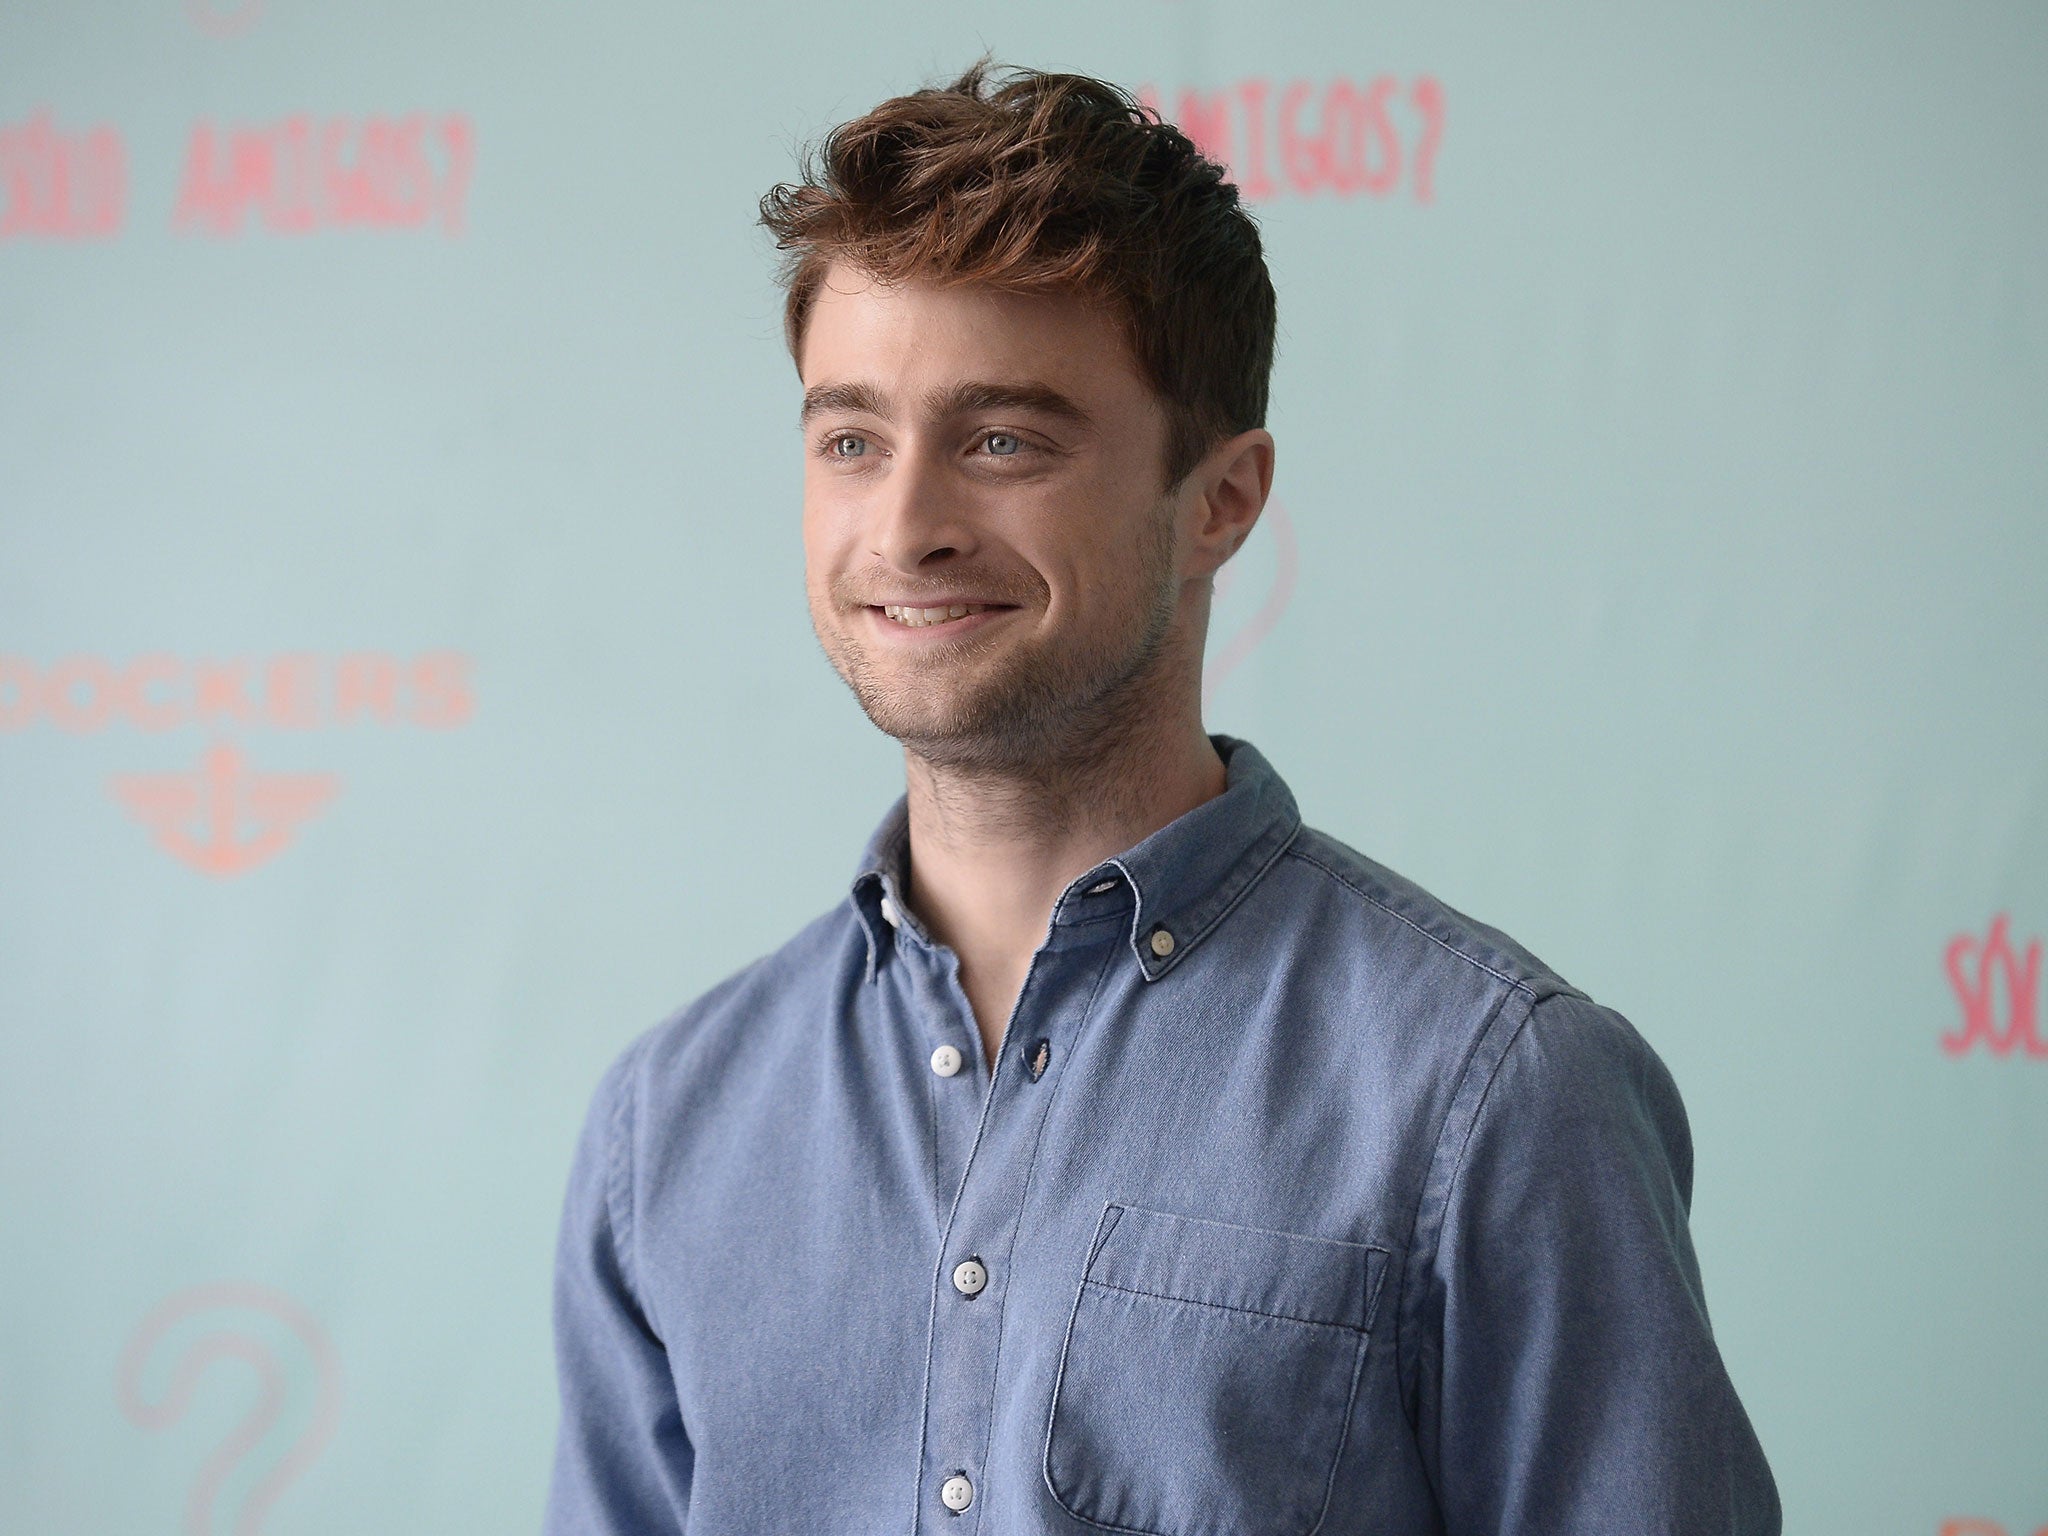 Daniel Radcliffe says he is bored with people saying it's 'odd' he's a sex symbol